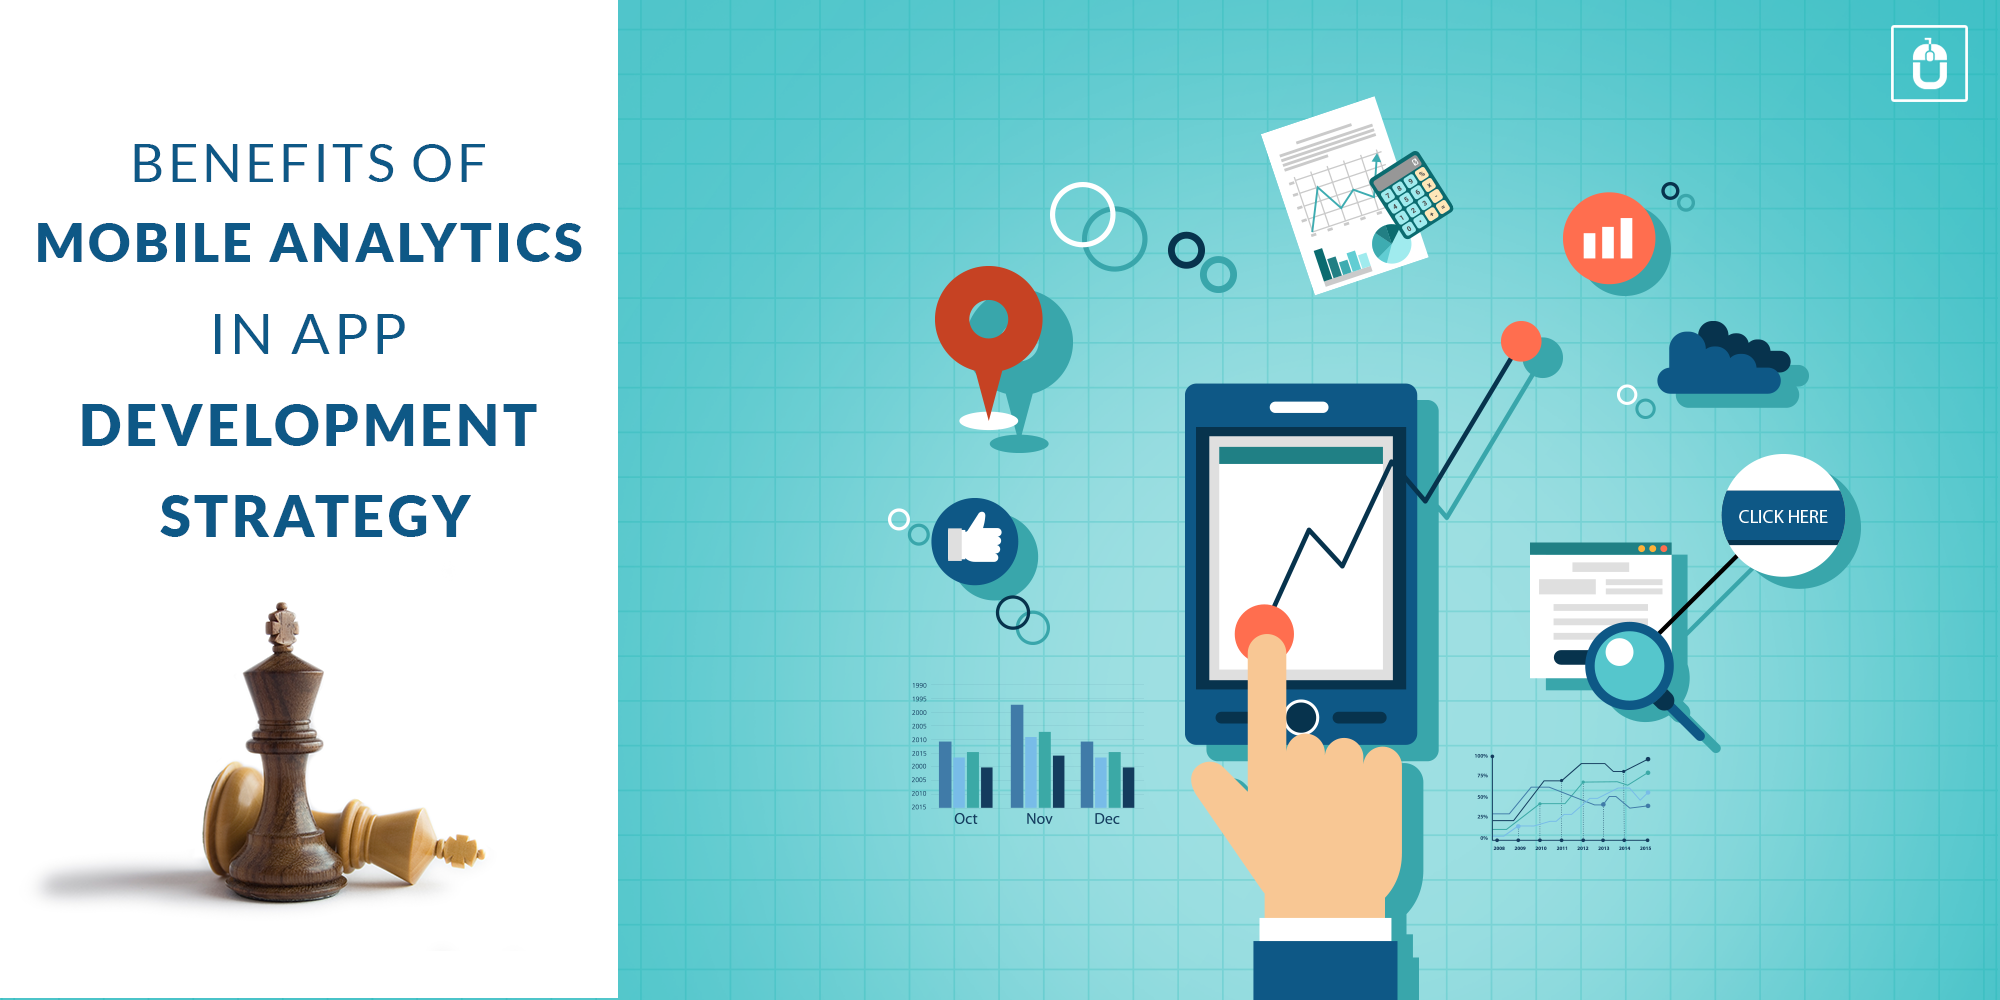 MOBILE ANALYTICS CAN RESHAPE YOUR APP DEVELOPMENT STRATEGY (Updated)